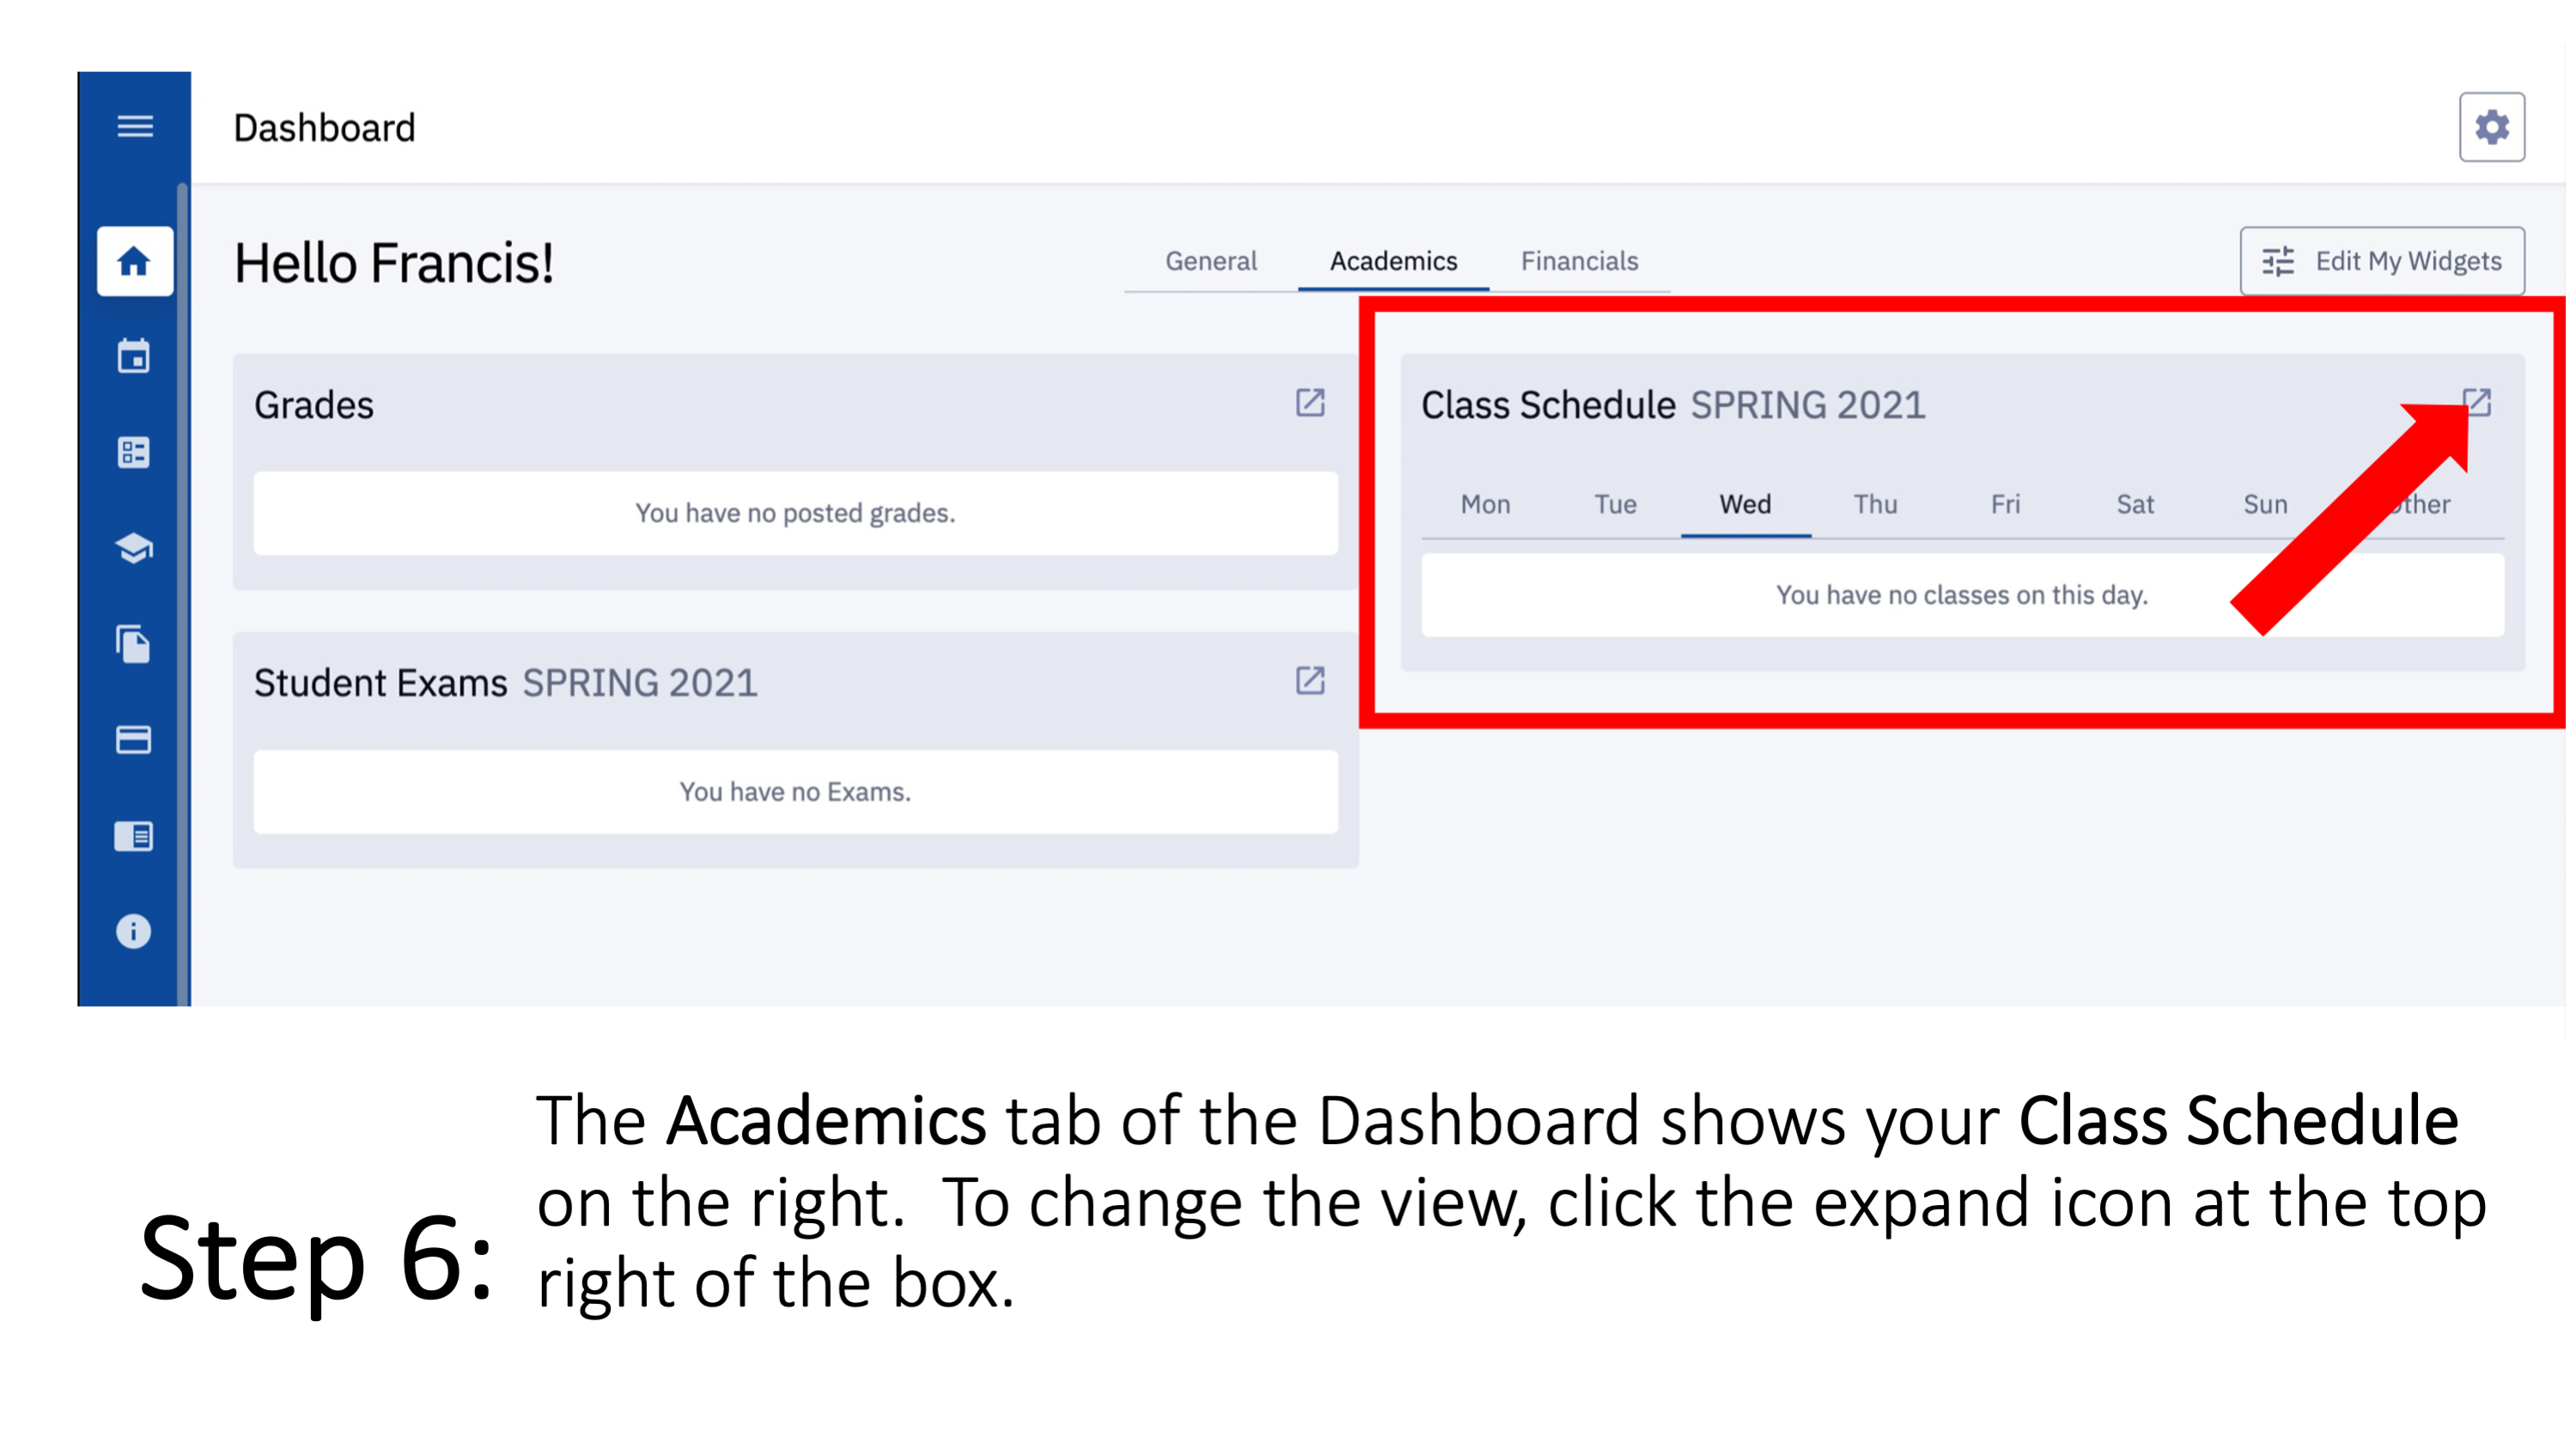 Step 6: The Academics tab of the Dashboard shows your Class Schedule on the right.  To change the view, click the expand icon at the top right of the box.